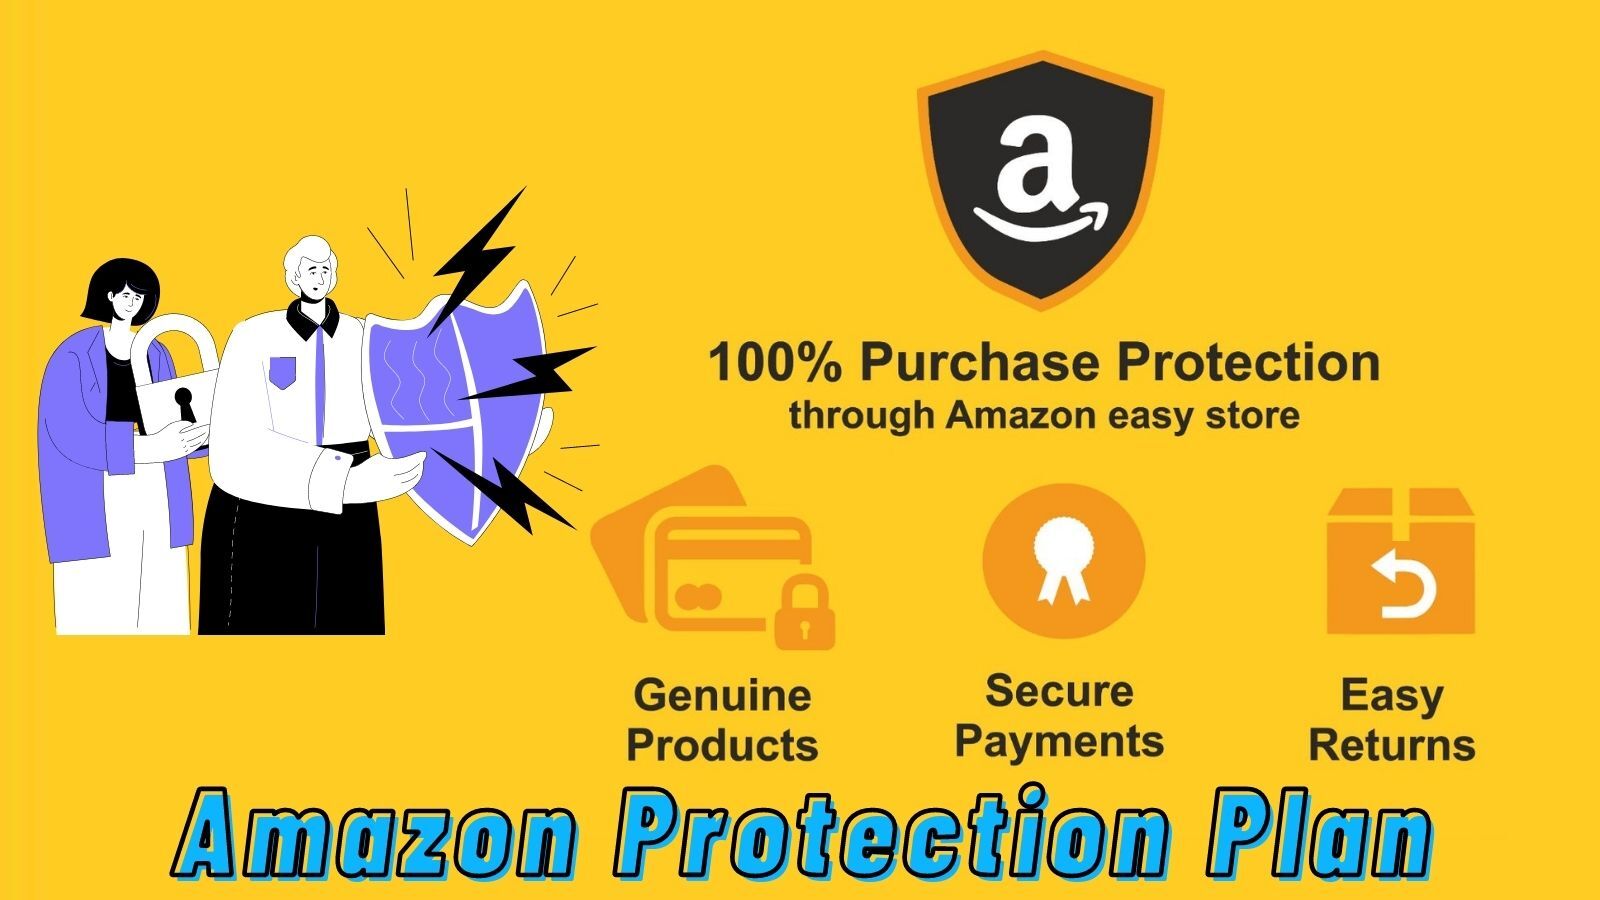 Amazon Protection Plan (A Full Guide!)